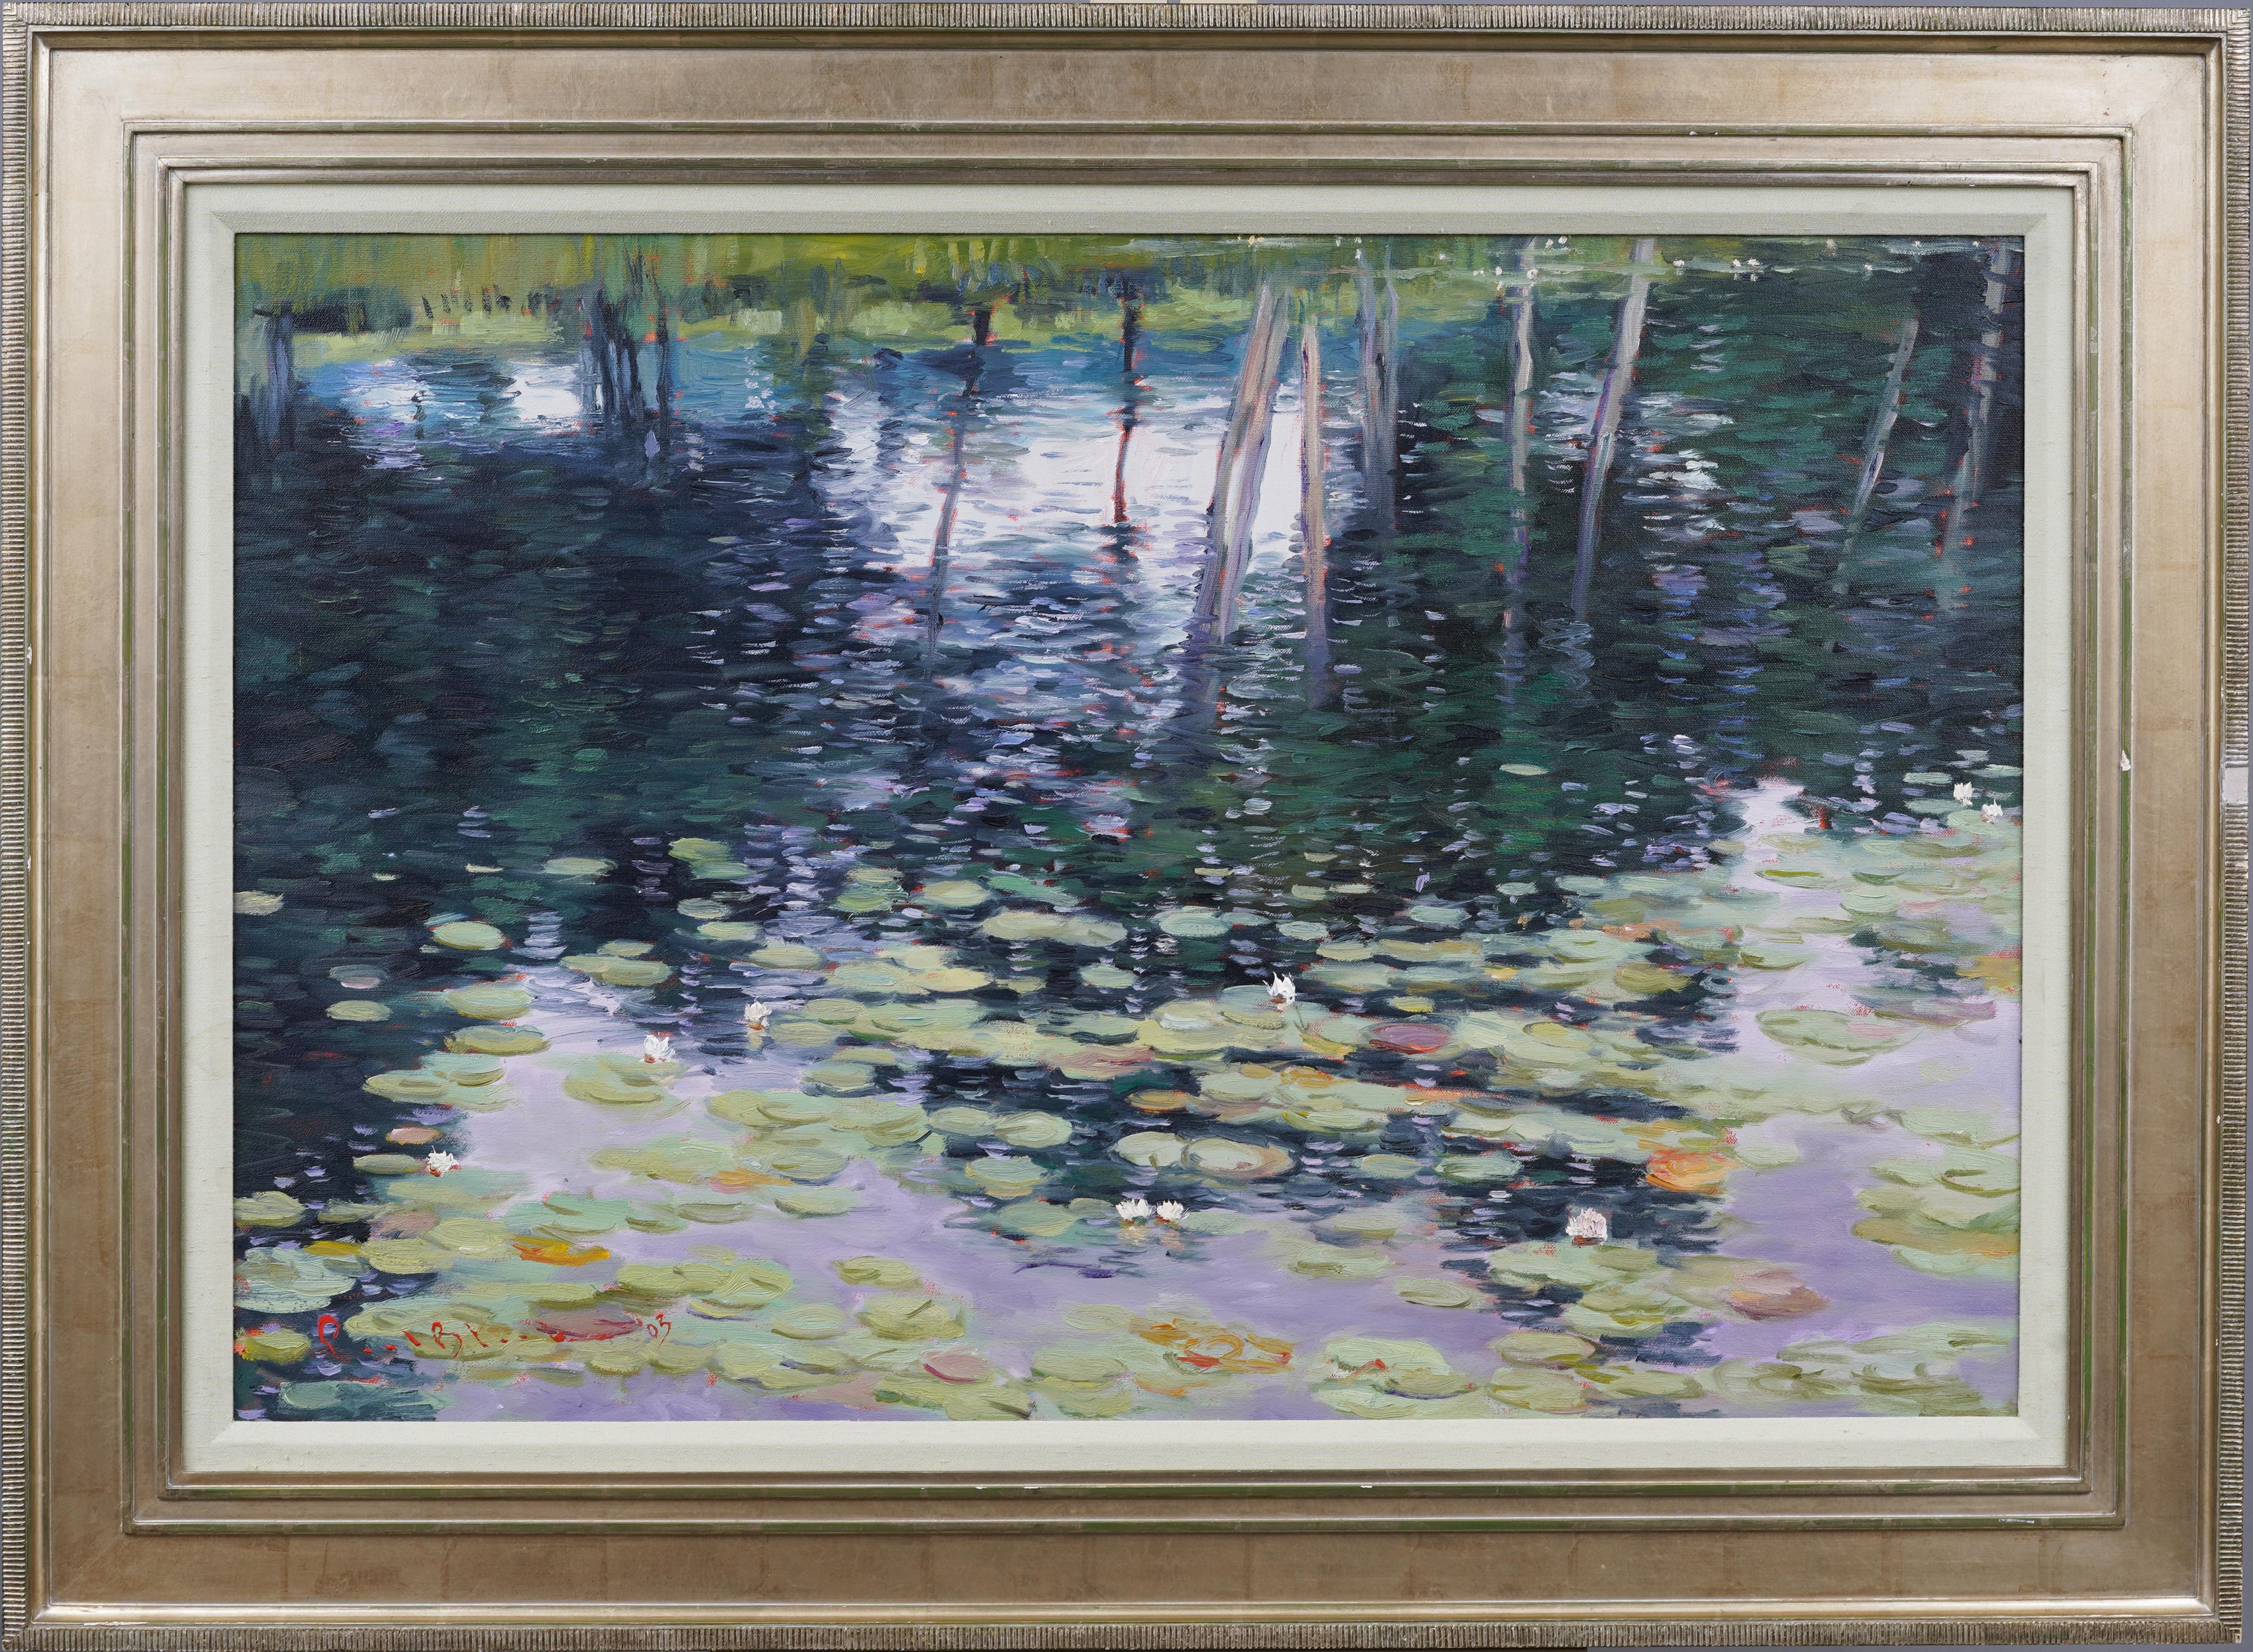 Unknown Landscape Painting - Vintage Large Framed American Impressionist Water Lilly Landscape Oil Painting